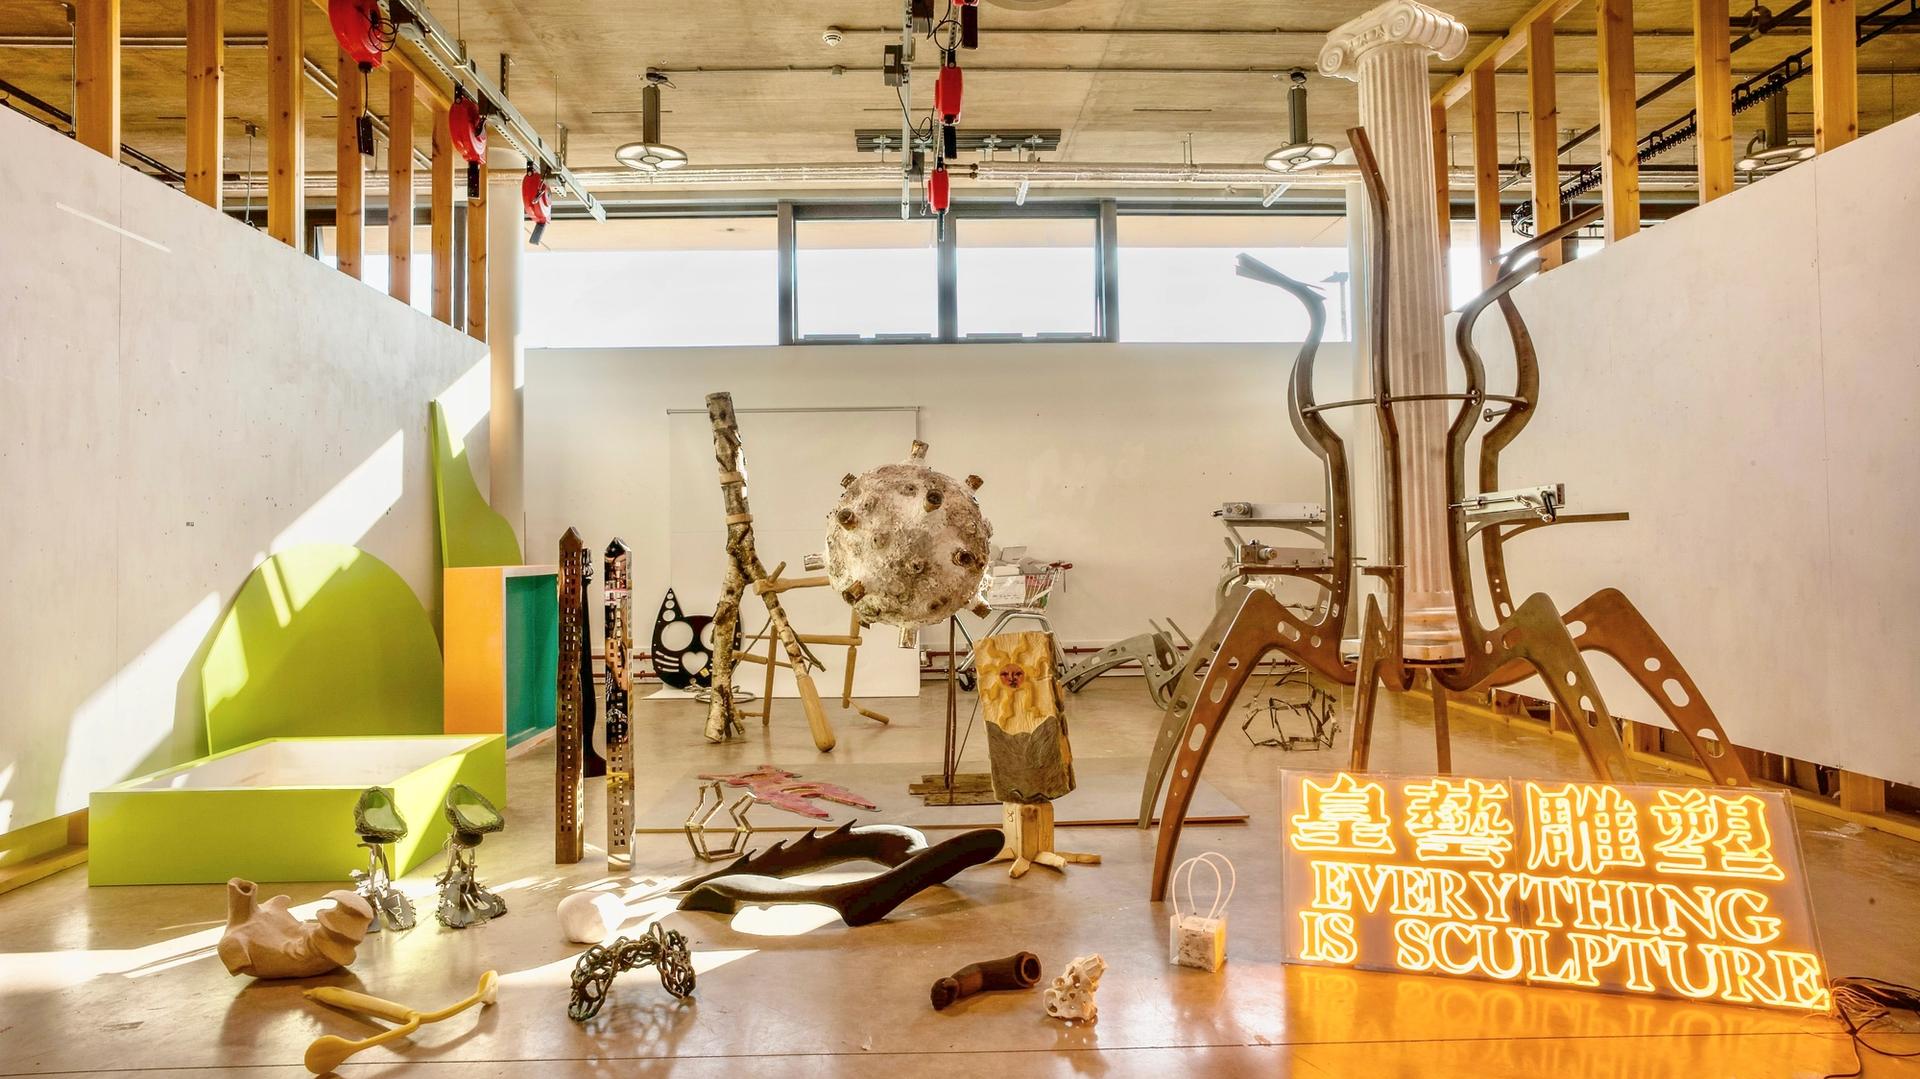 A photograph of a corner of a large space filled with sculptural works and various works on the floor and attached to a wall.